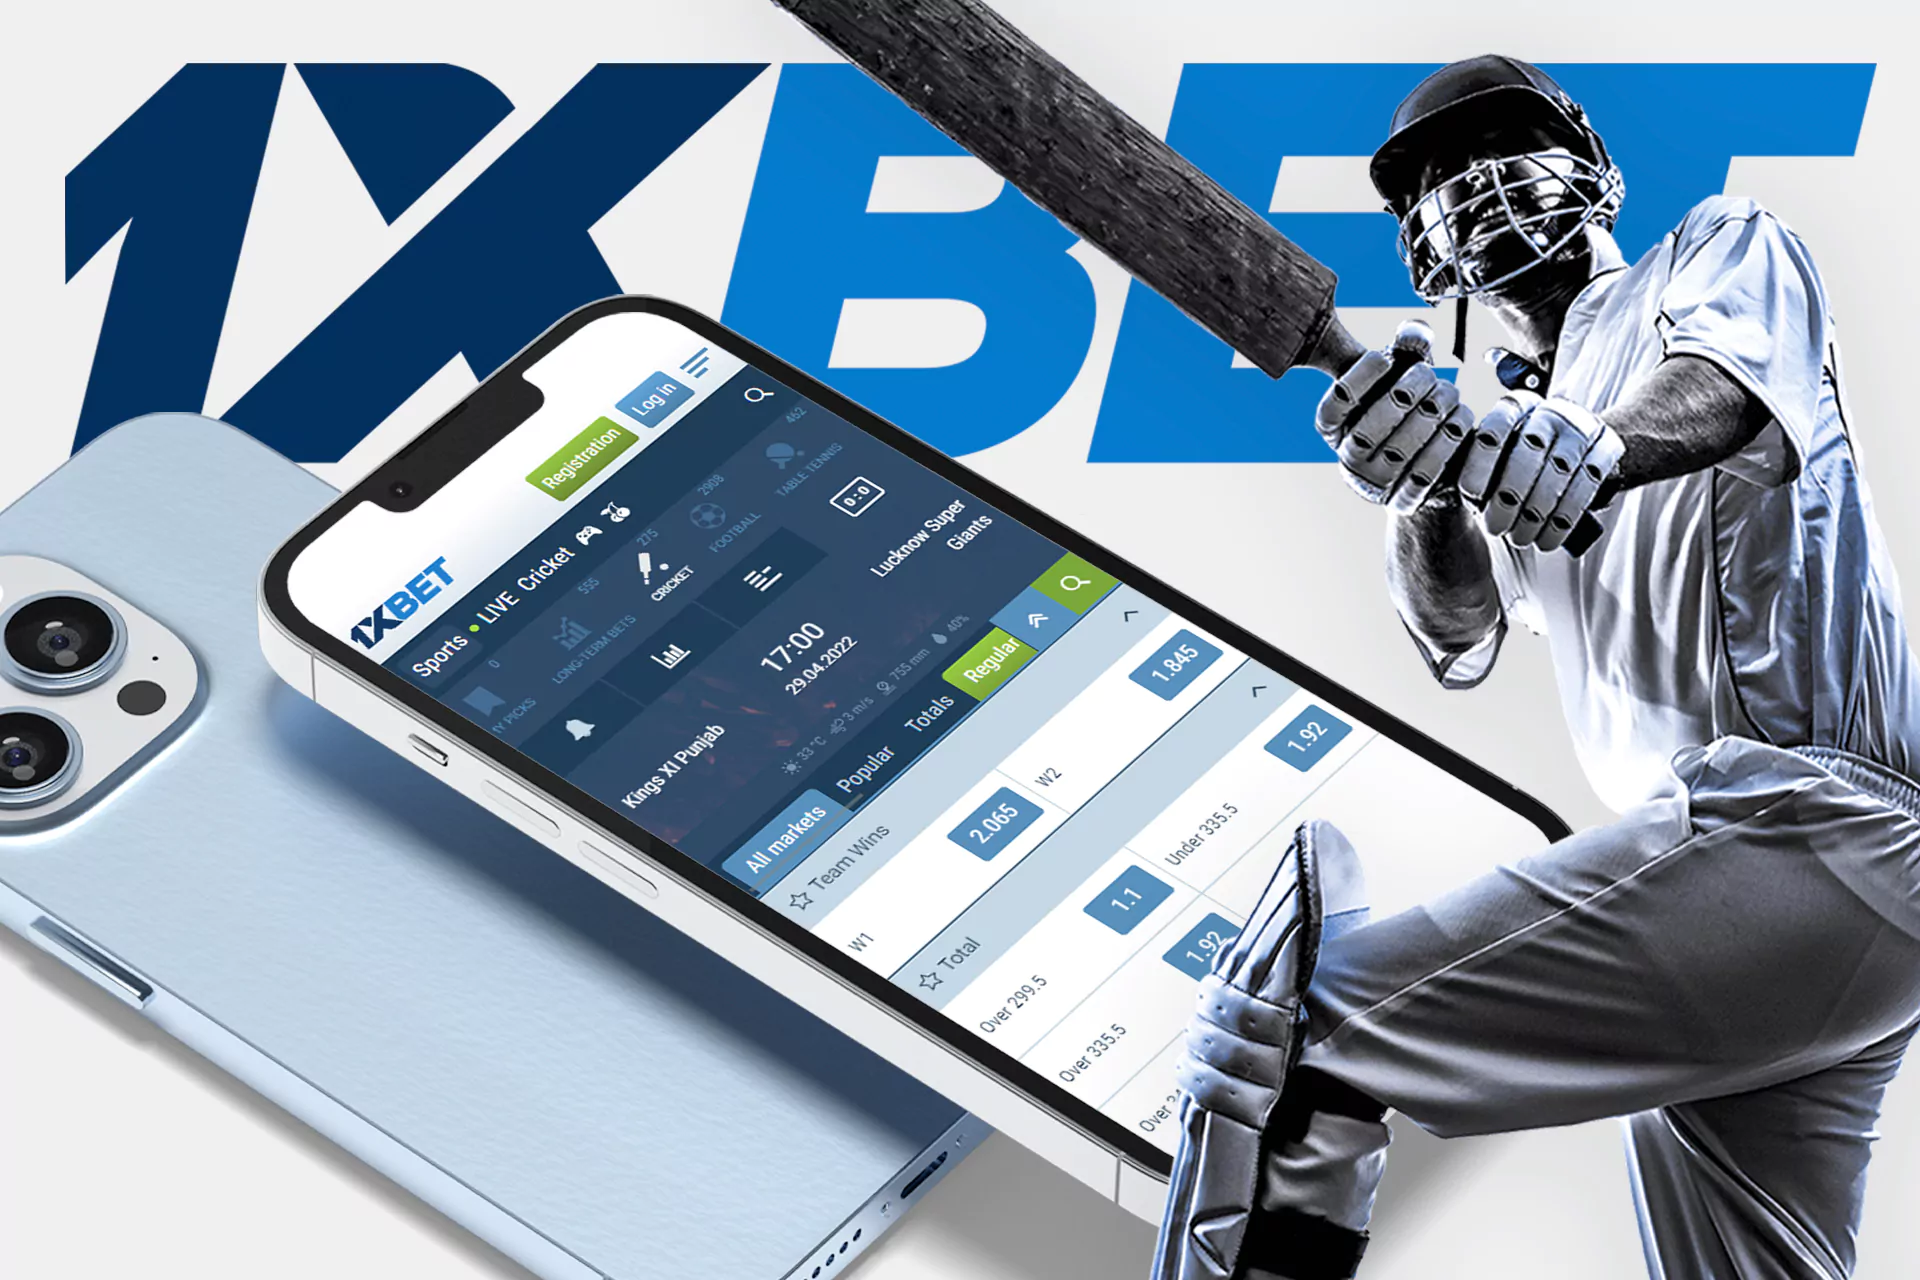 Users of the 1xBet app can bet on cricket online.